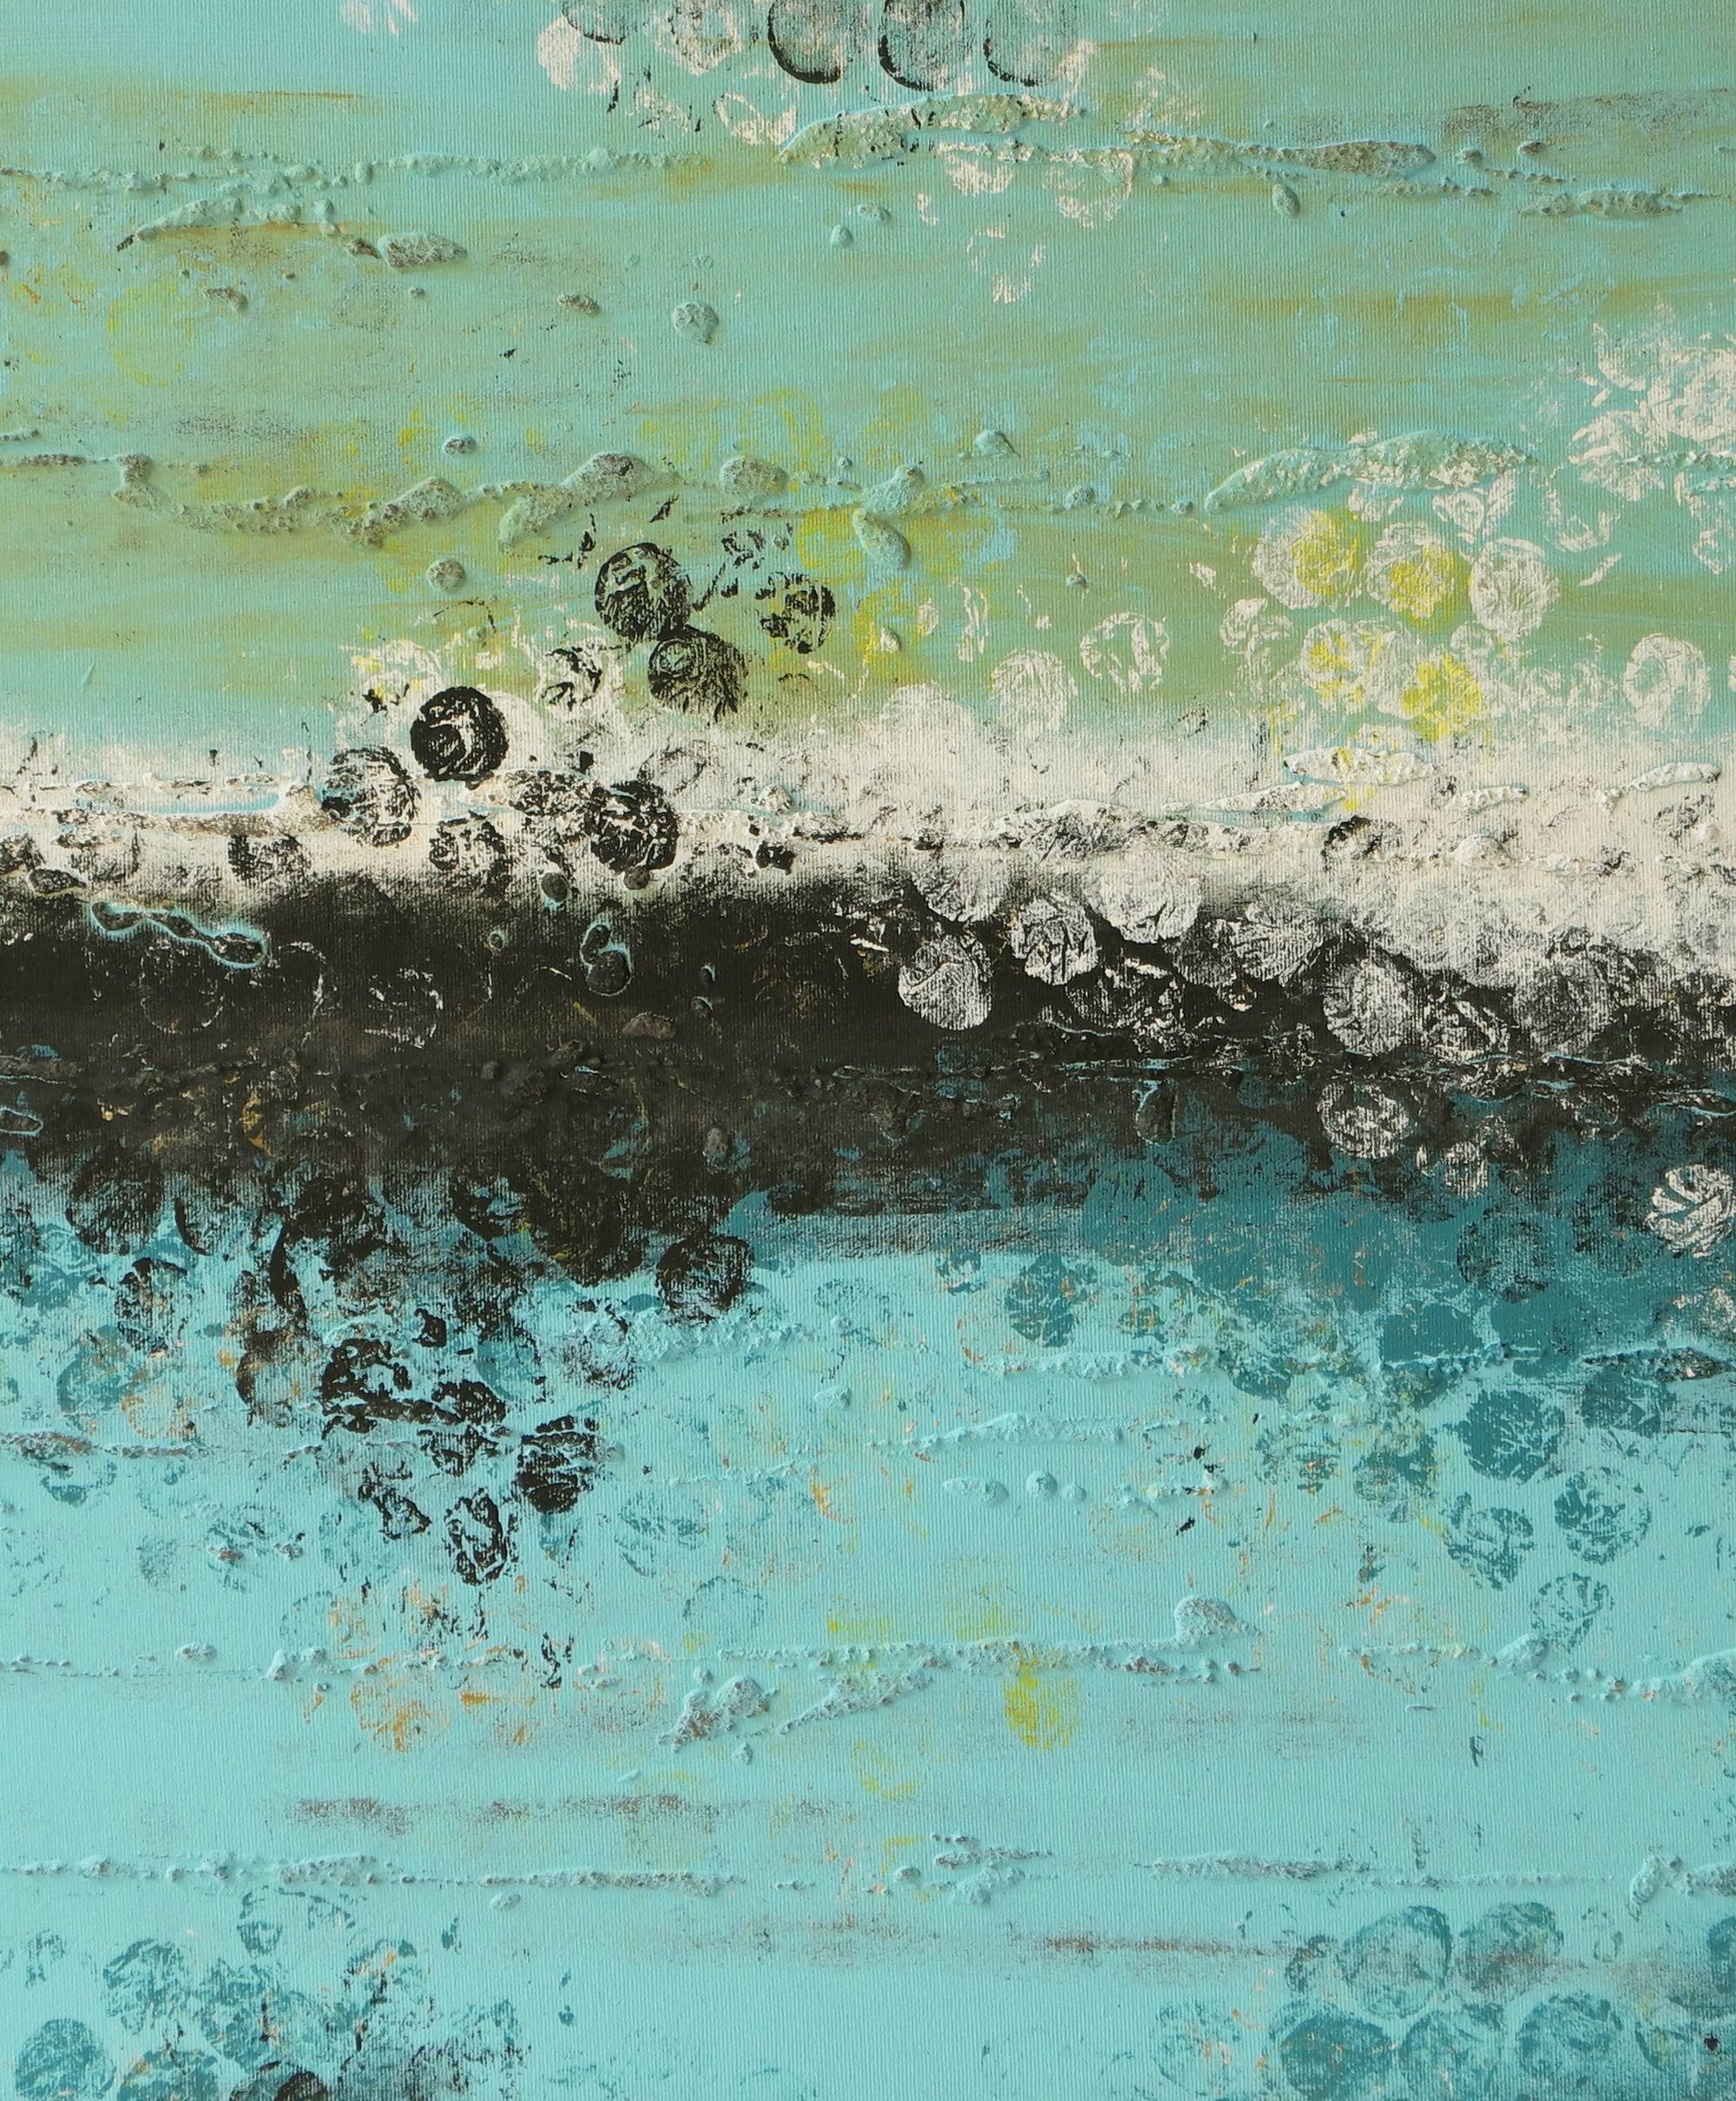 Boiling Bubbles Landscape Turquoise, Painting, Acrylic on Canvas 1